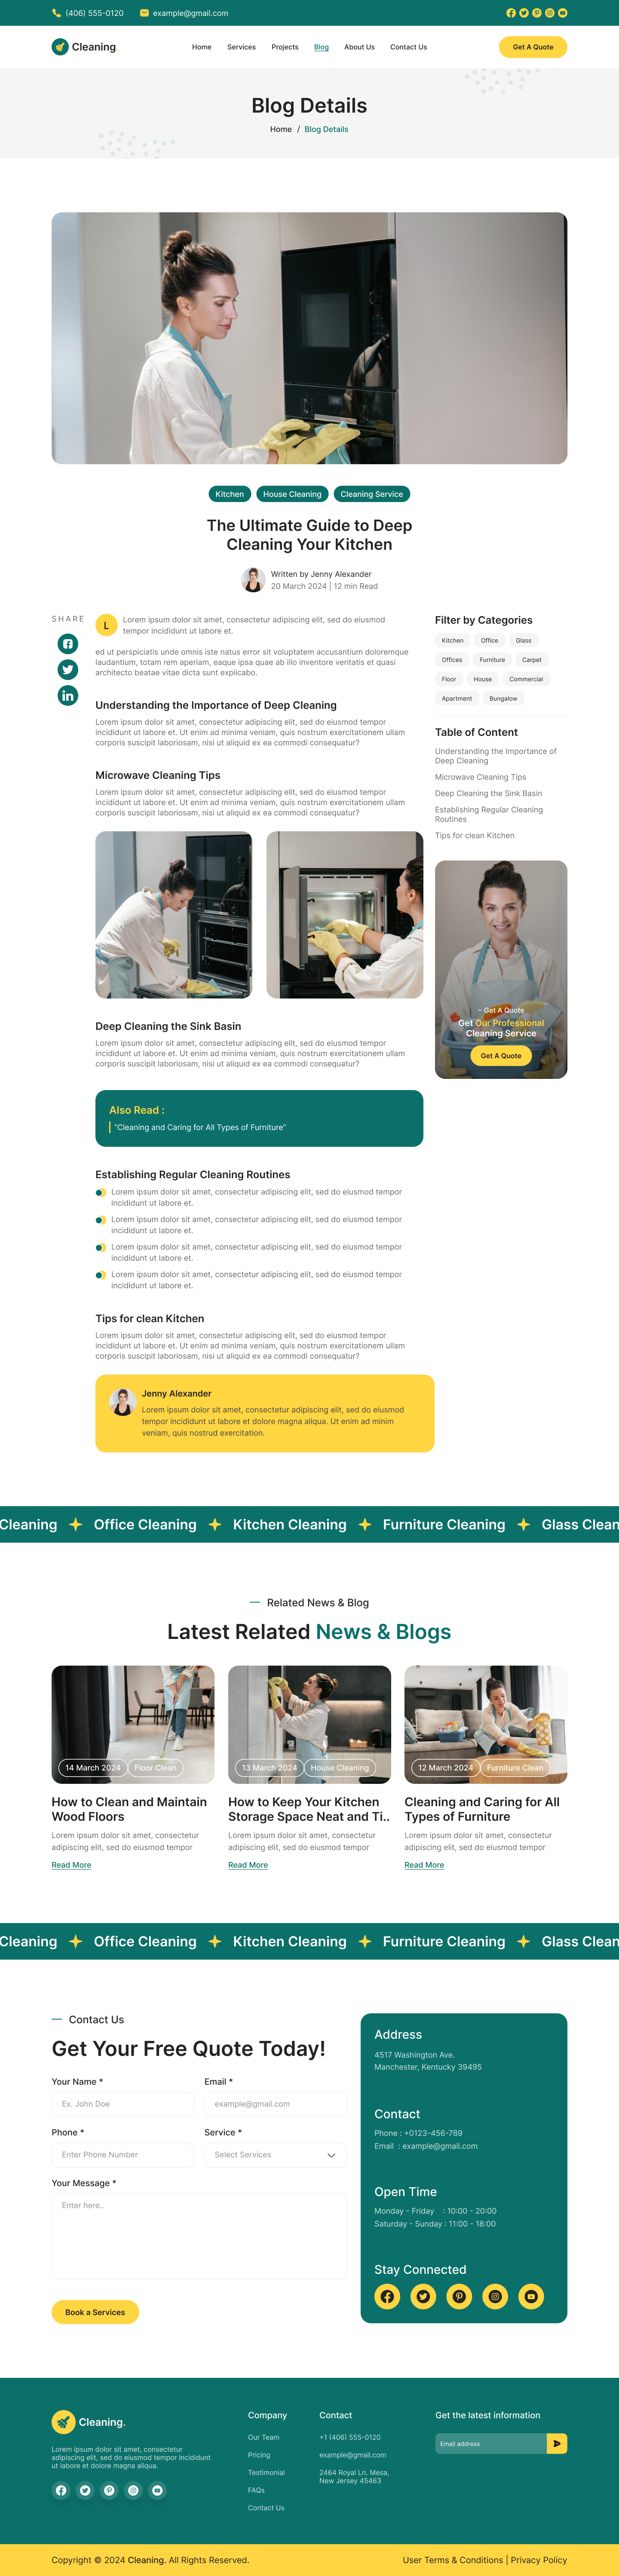 cleaning service website Blogs Details Page figma design